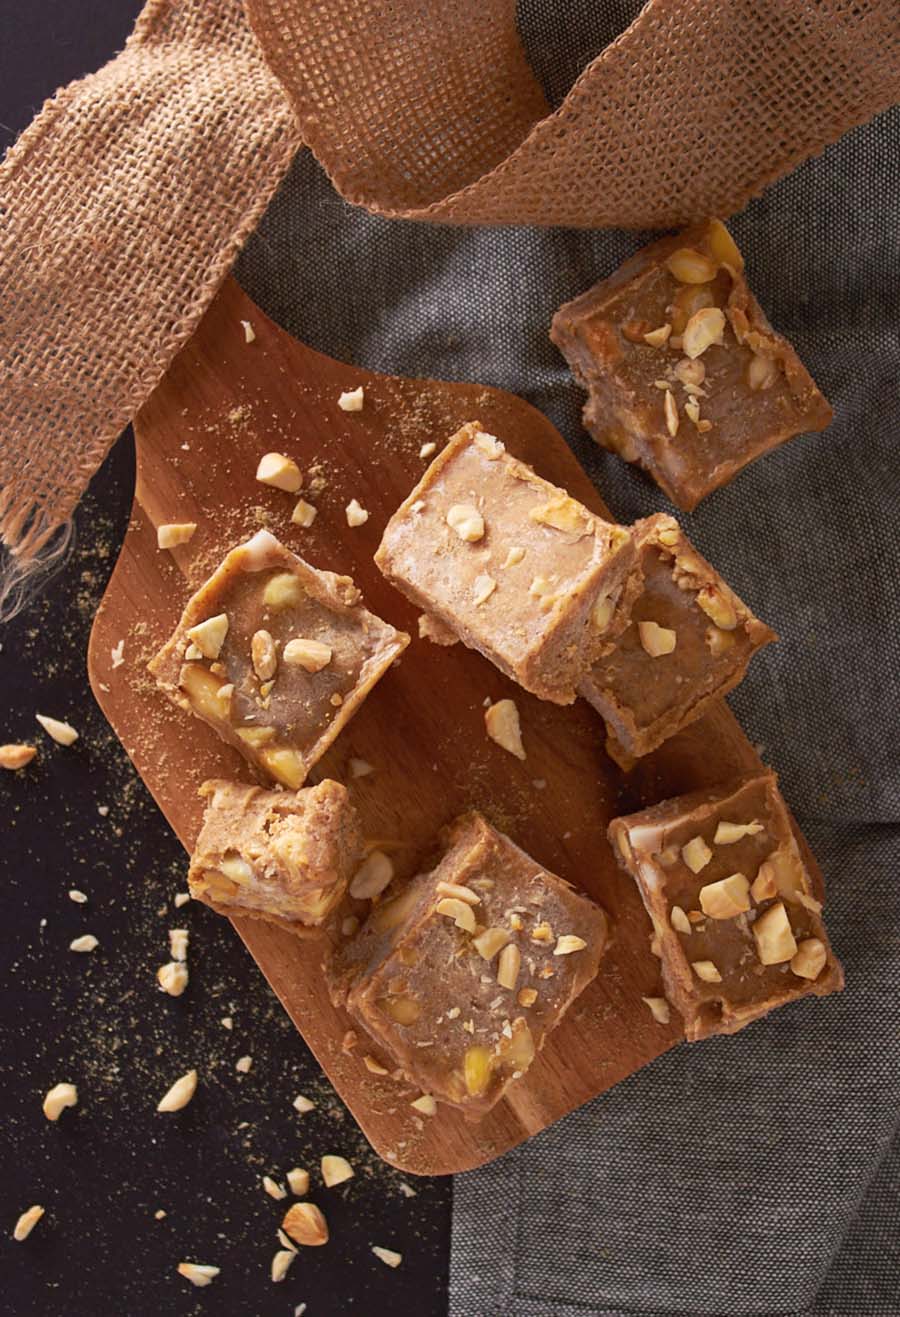 Blocks of fudge sitting on a wooden cutting board that is on top of a black counter with nut pieces strewn about.